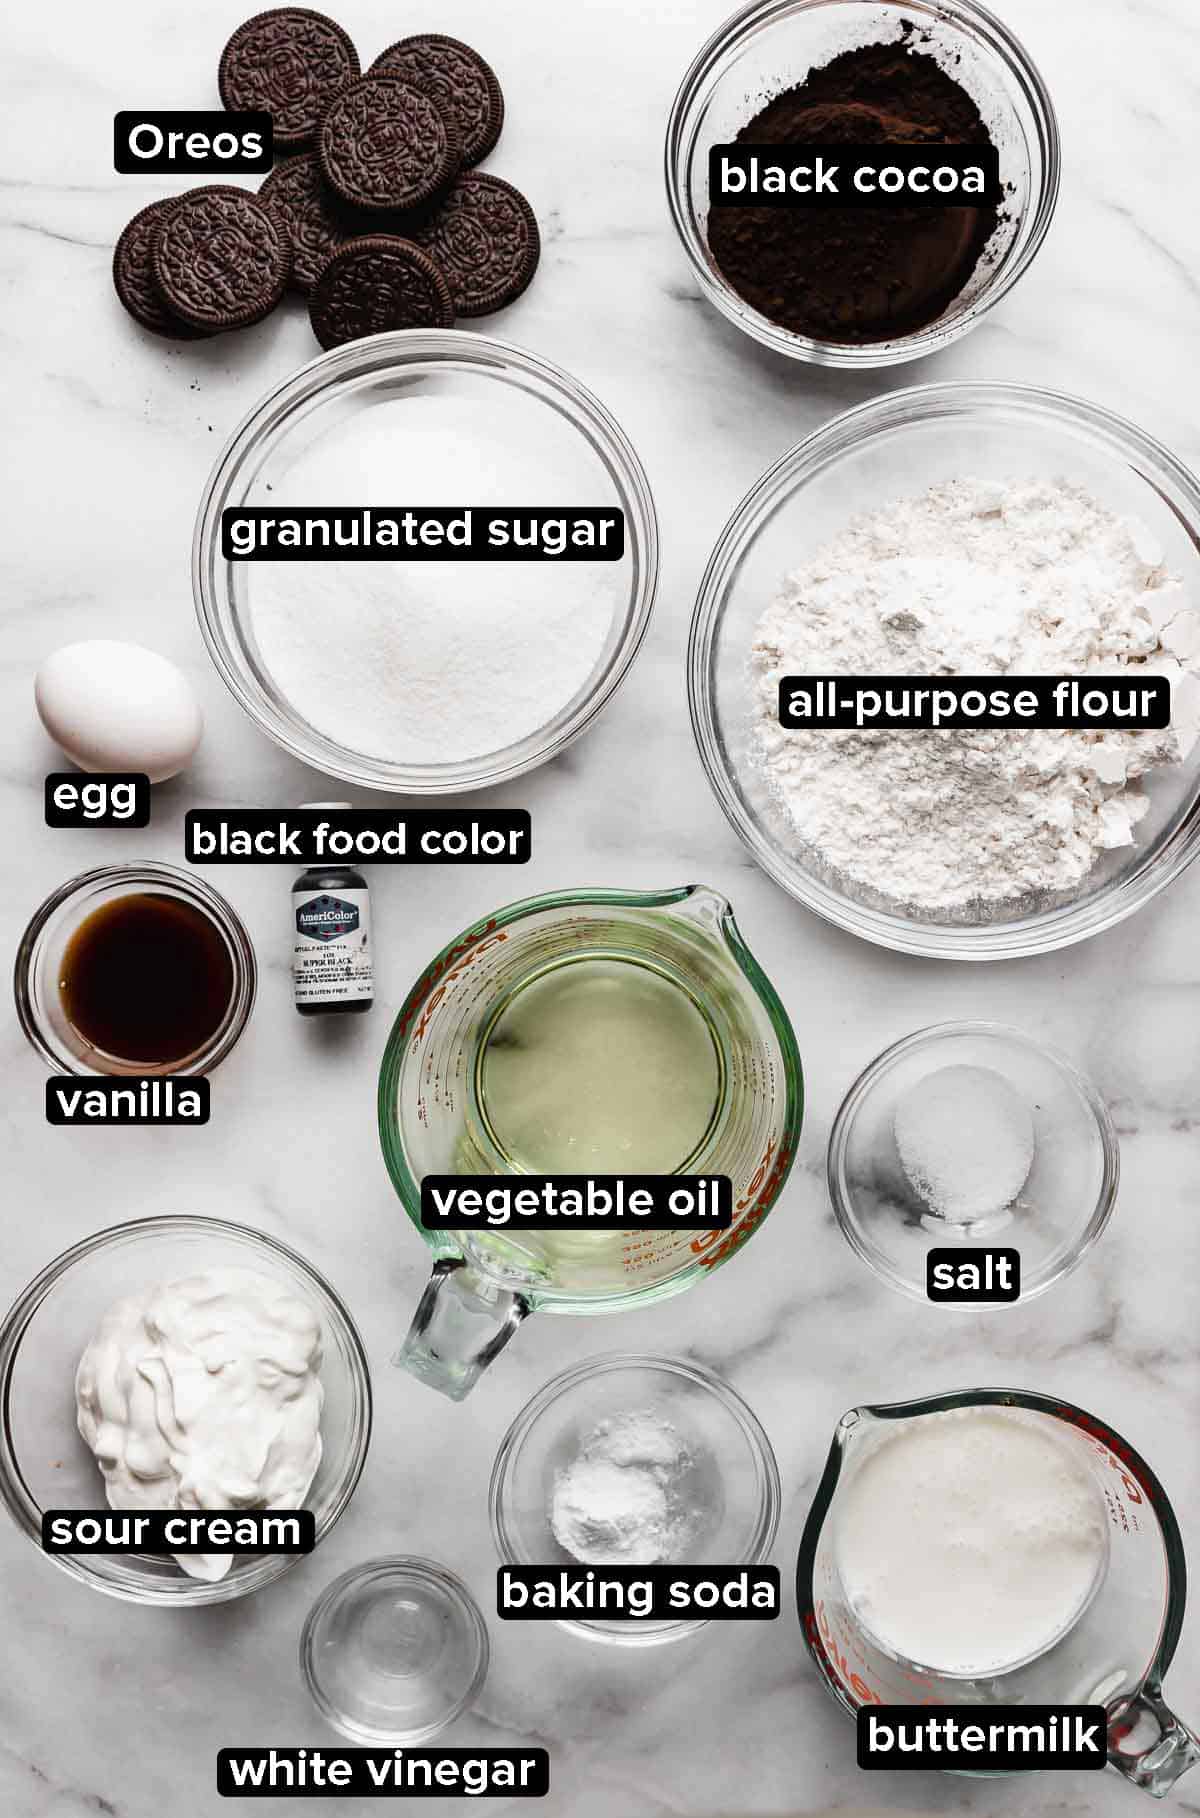 Oreo Cupcake ingredients portioned into glass bowls on a white background.